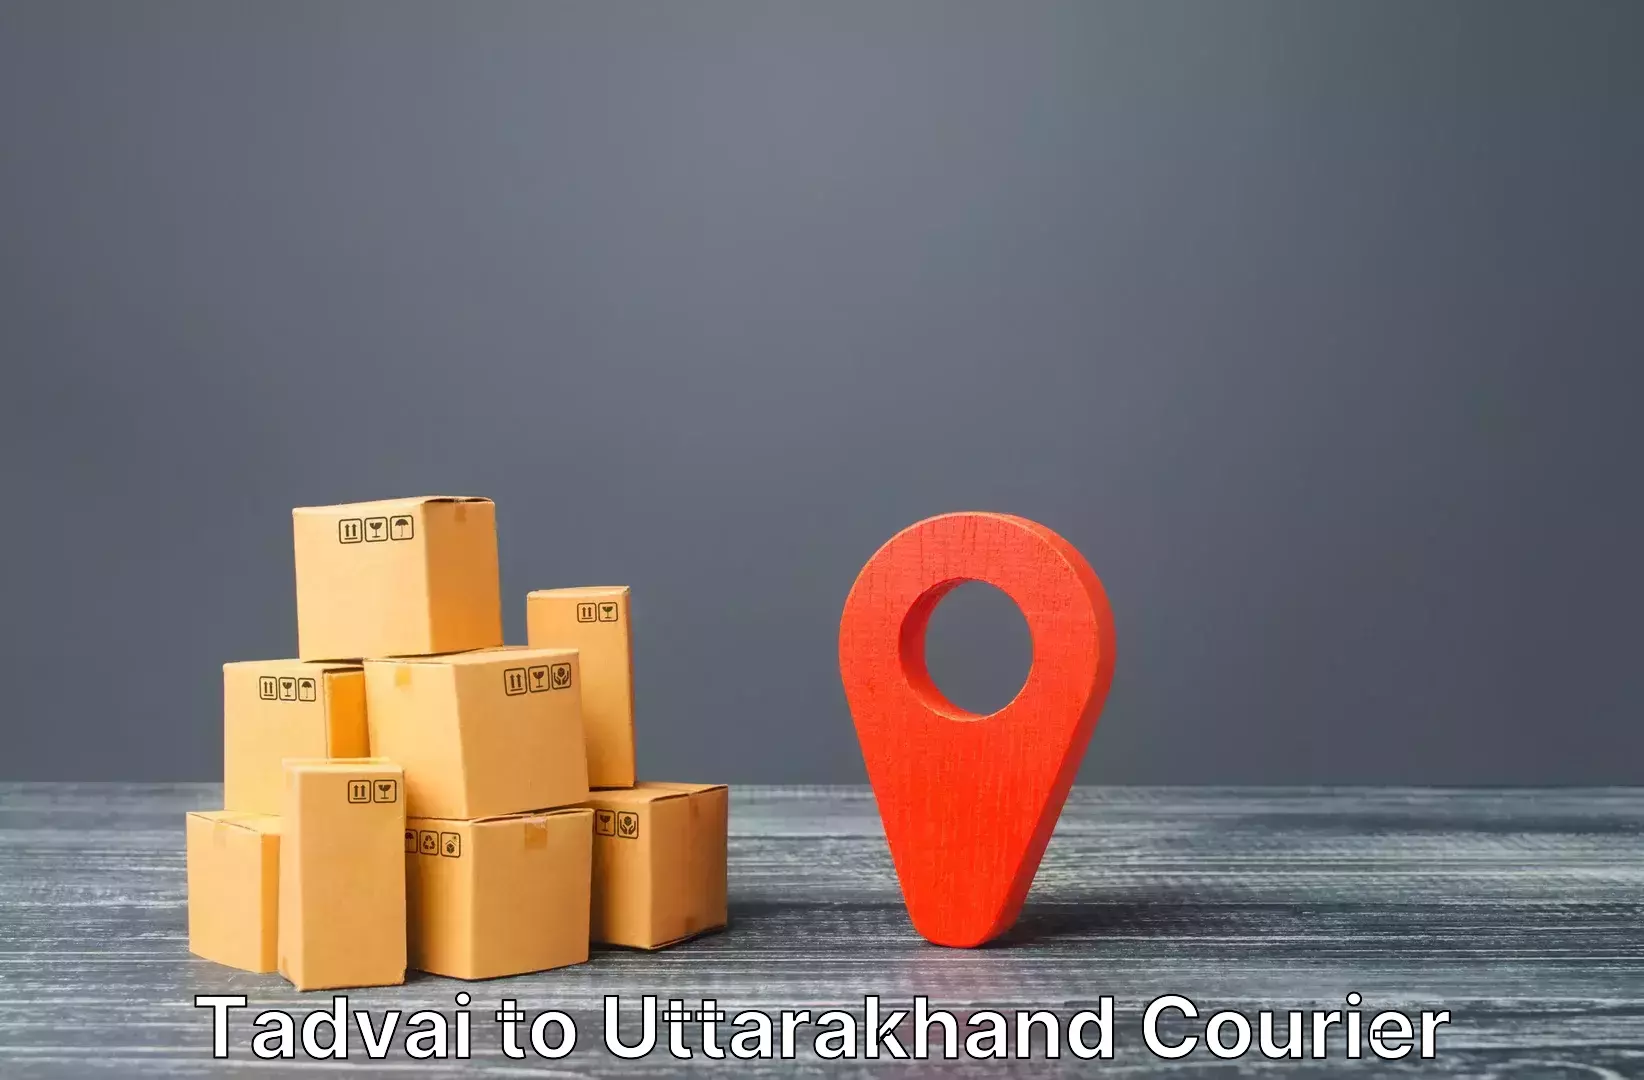 Door to door luggage delivery Tadvai to Uttarakhand